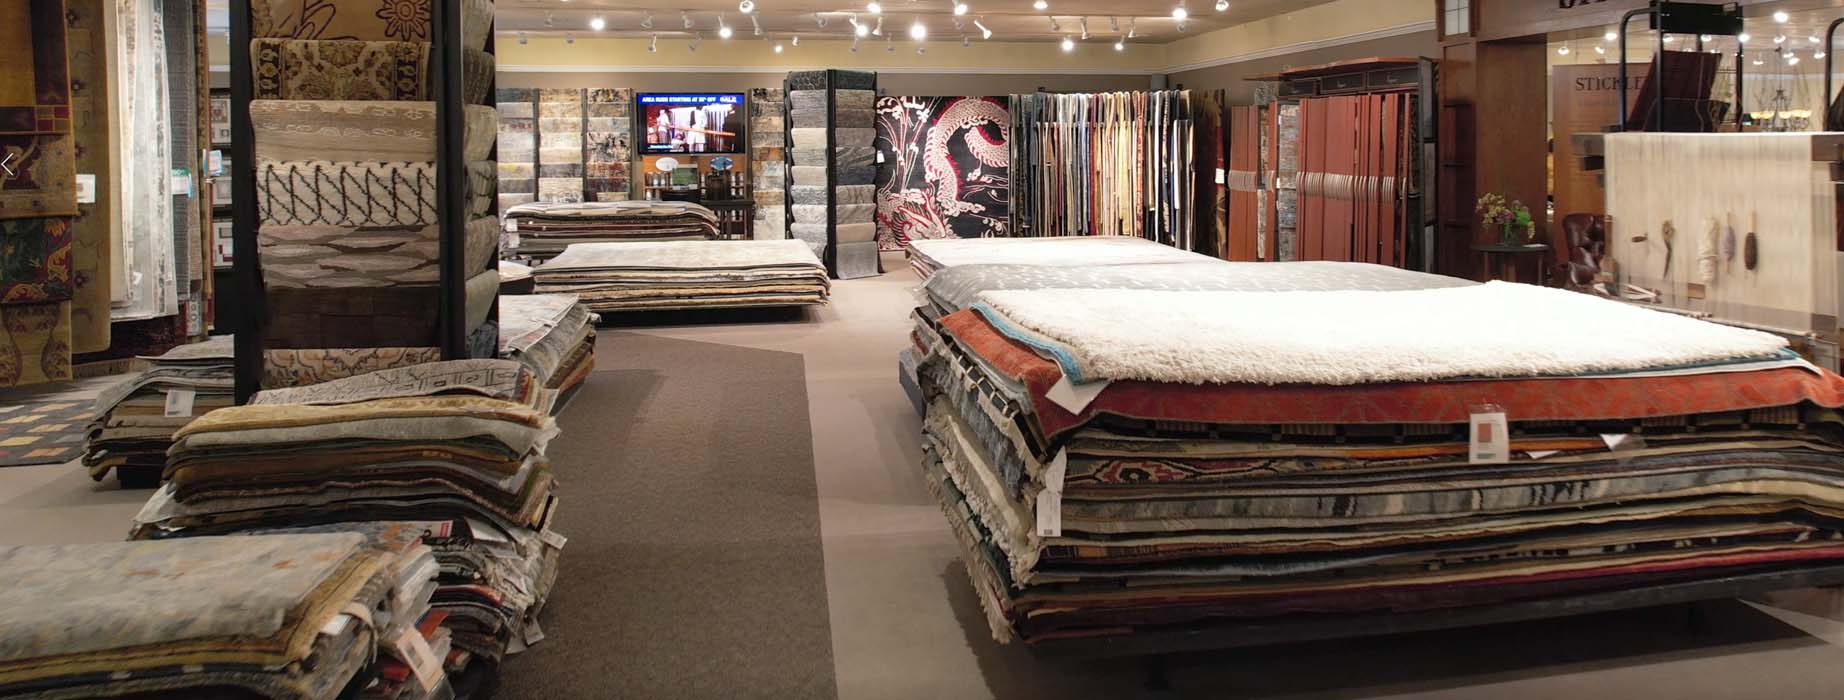 A picture of our showroom in Seldens of Tacoma featuring modern rugs, traditional rugs, transitional rugs, contemporary rugs, inddor/outdoor luxury rugs, shag rugs, and bohemian area rugs.